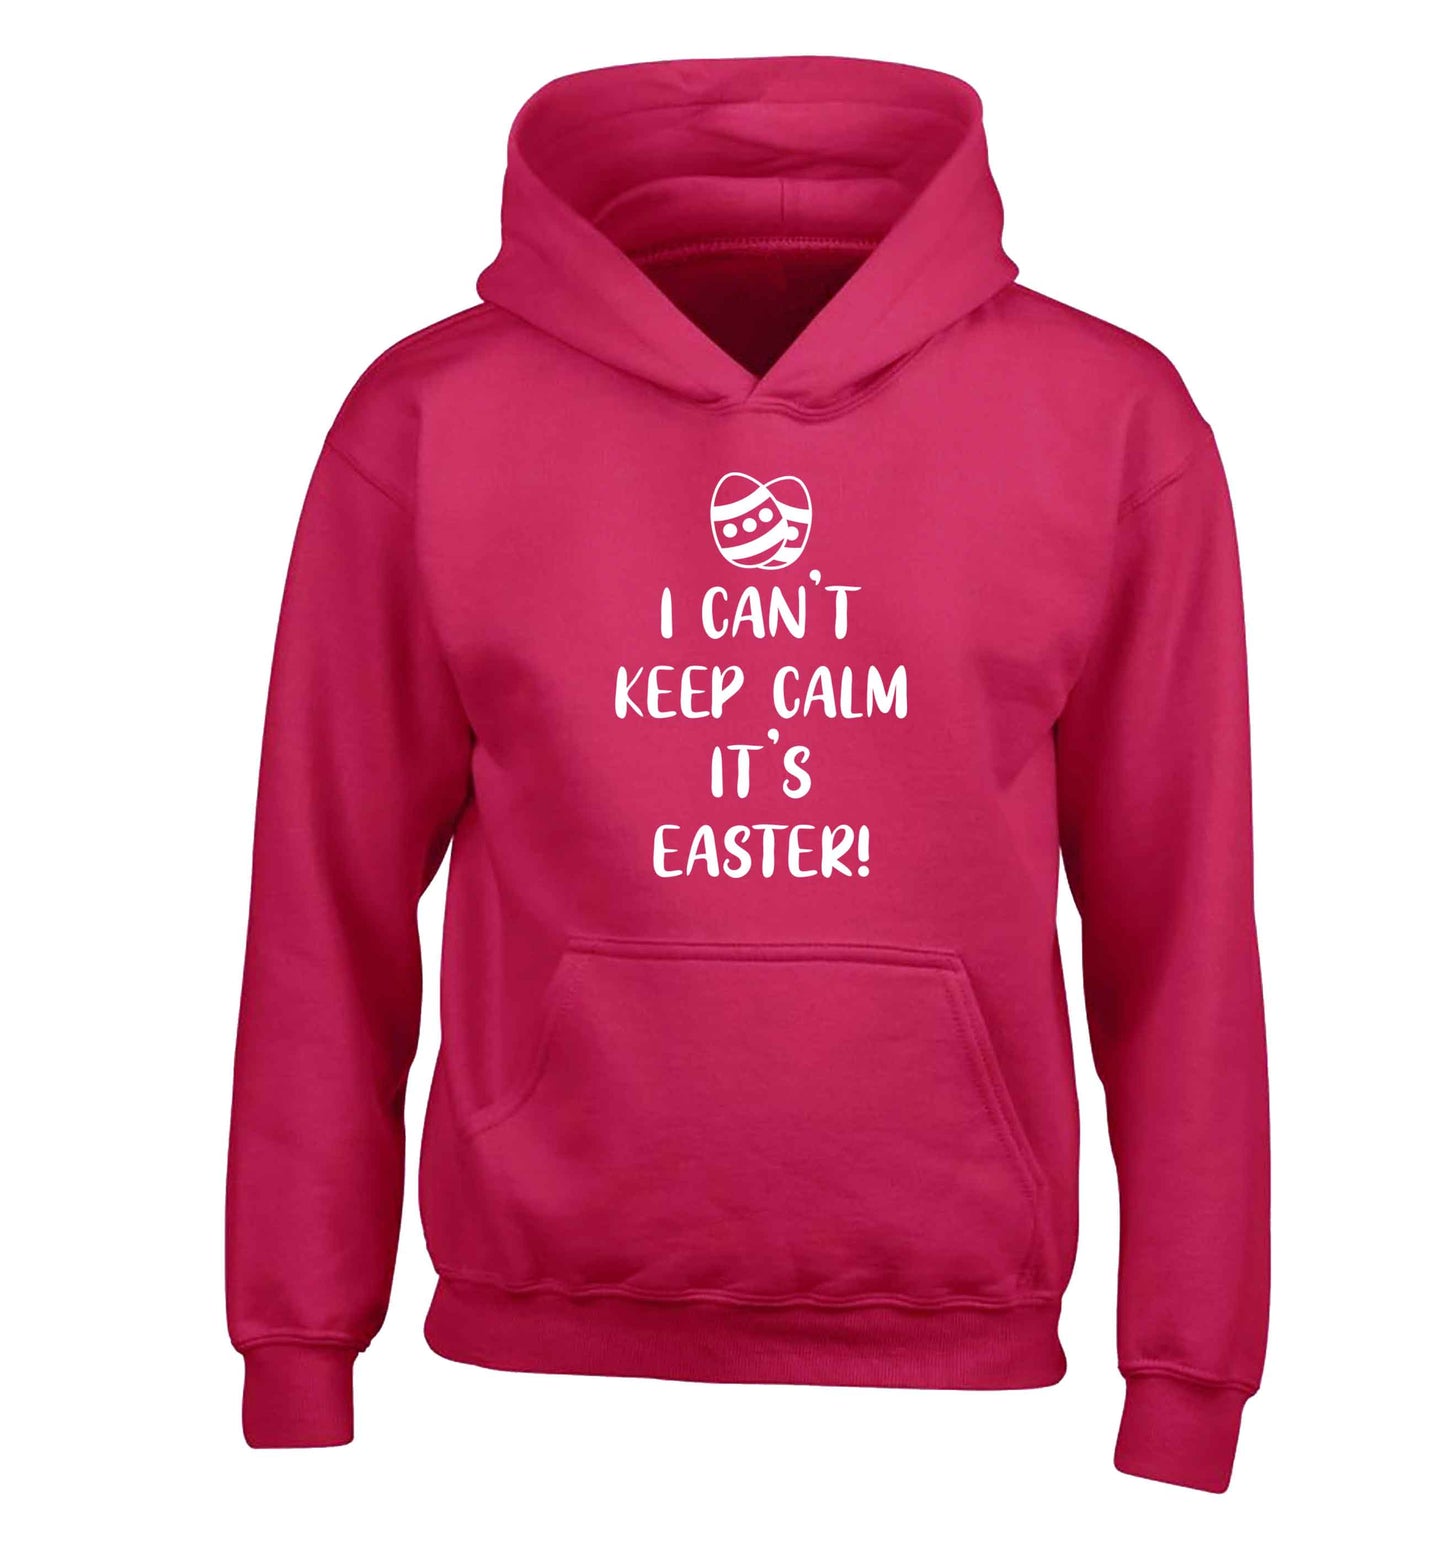 I can't keep calm it's Easter children's pink hoodie 12-13 Years